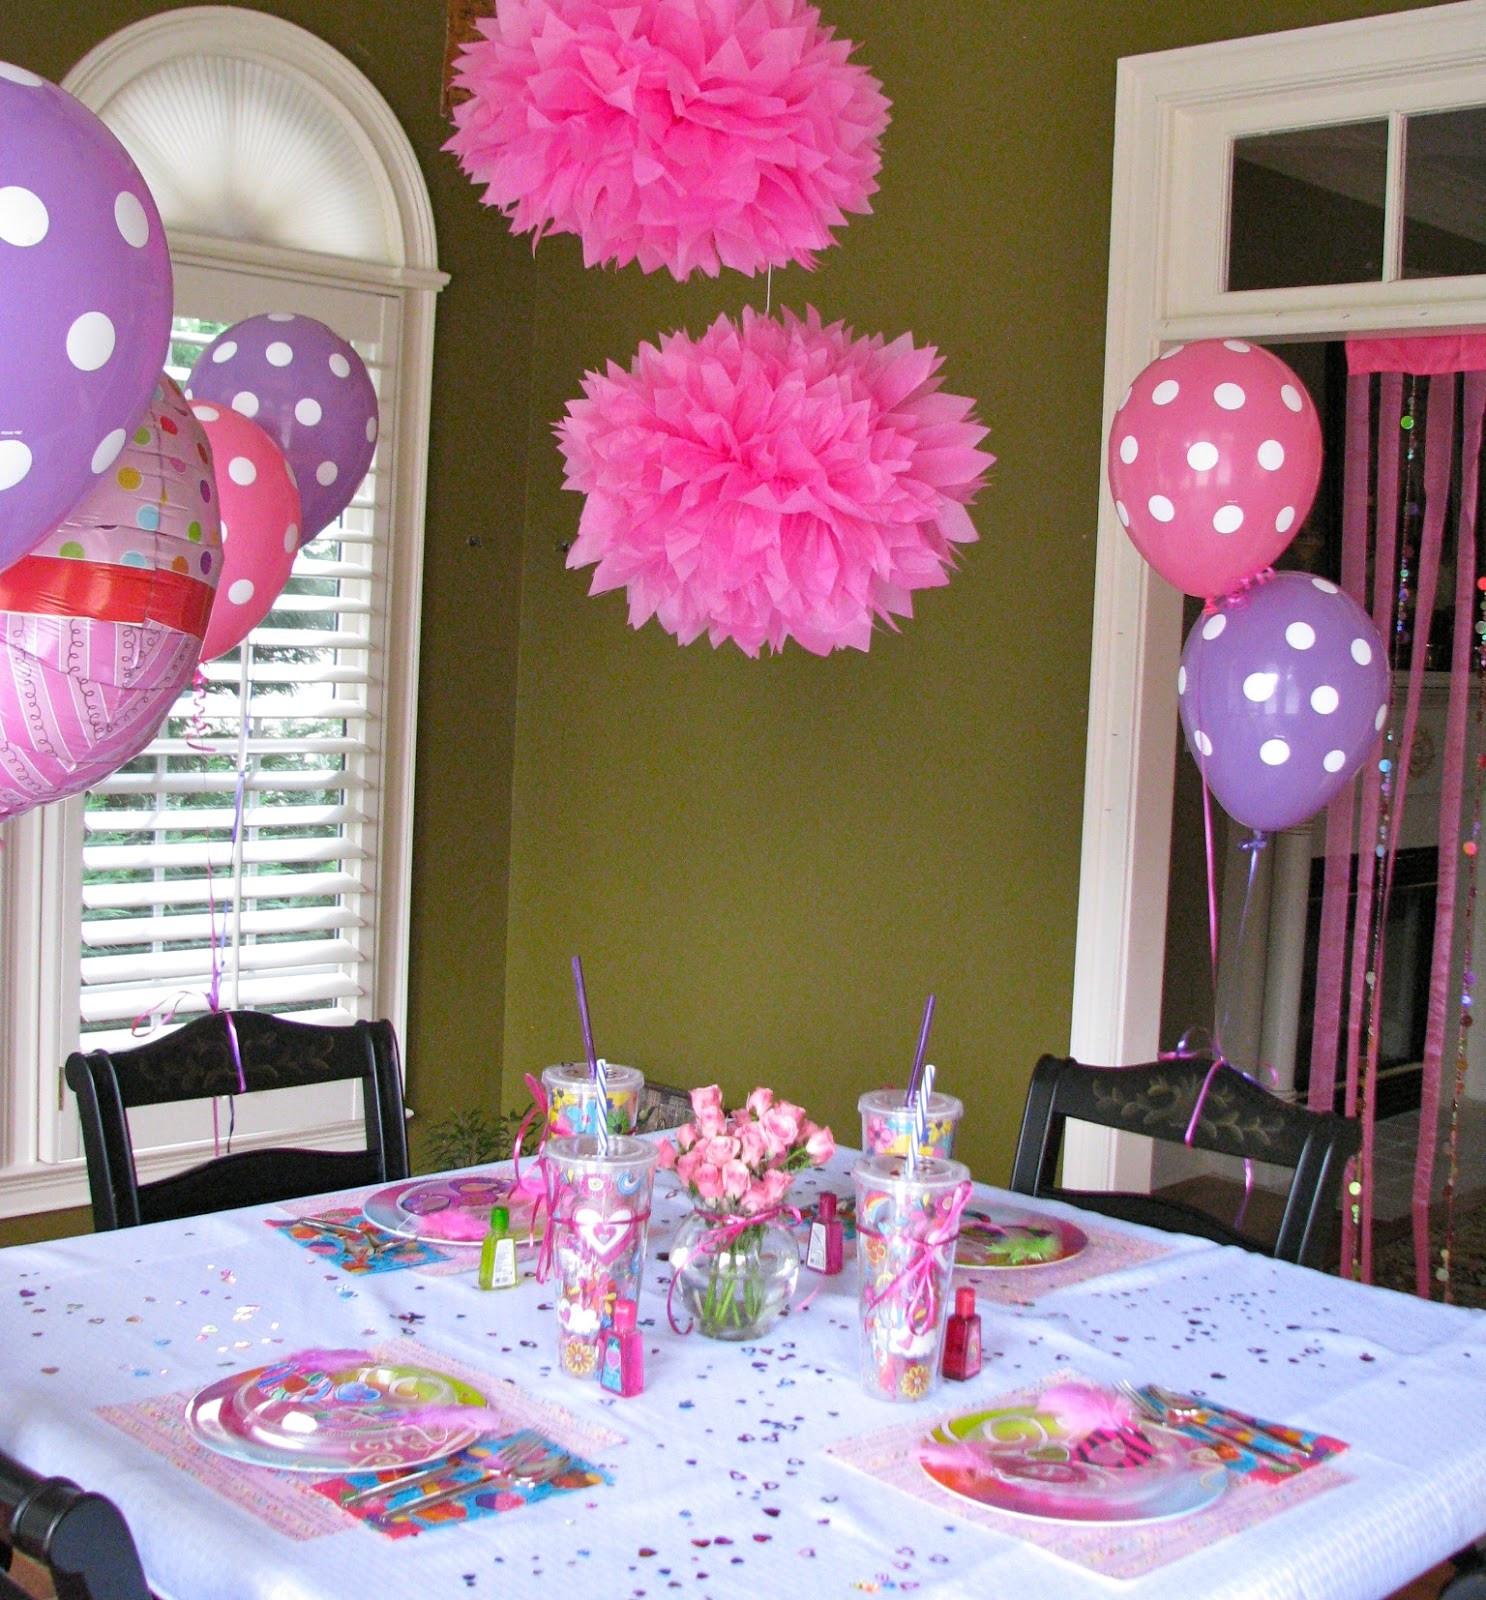 Birthday Party Decoration Ideas For Girl
 HomeMadeville Your Place for HomeMade Inspiration Girl s